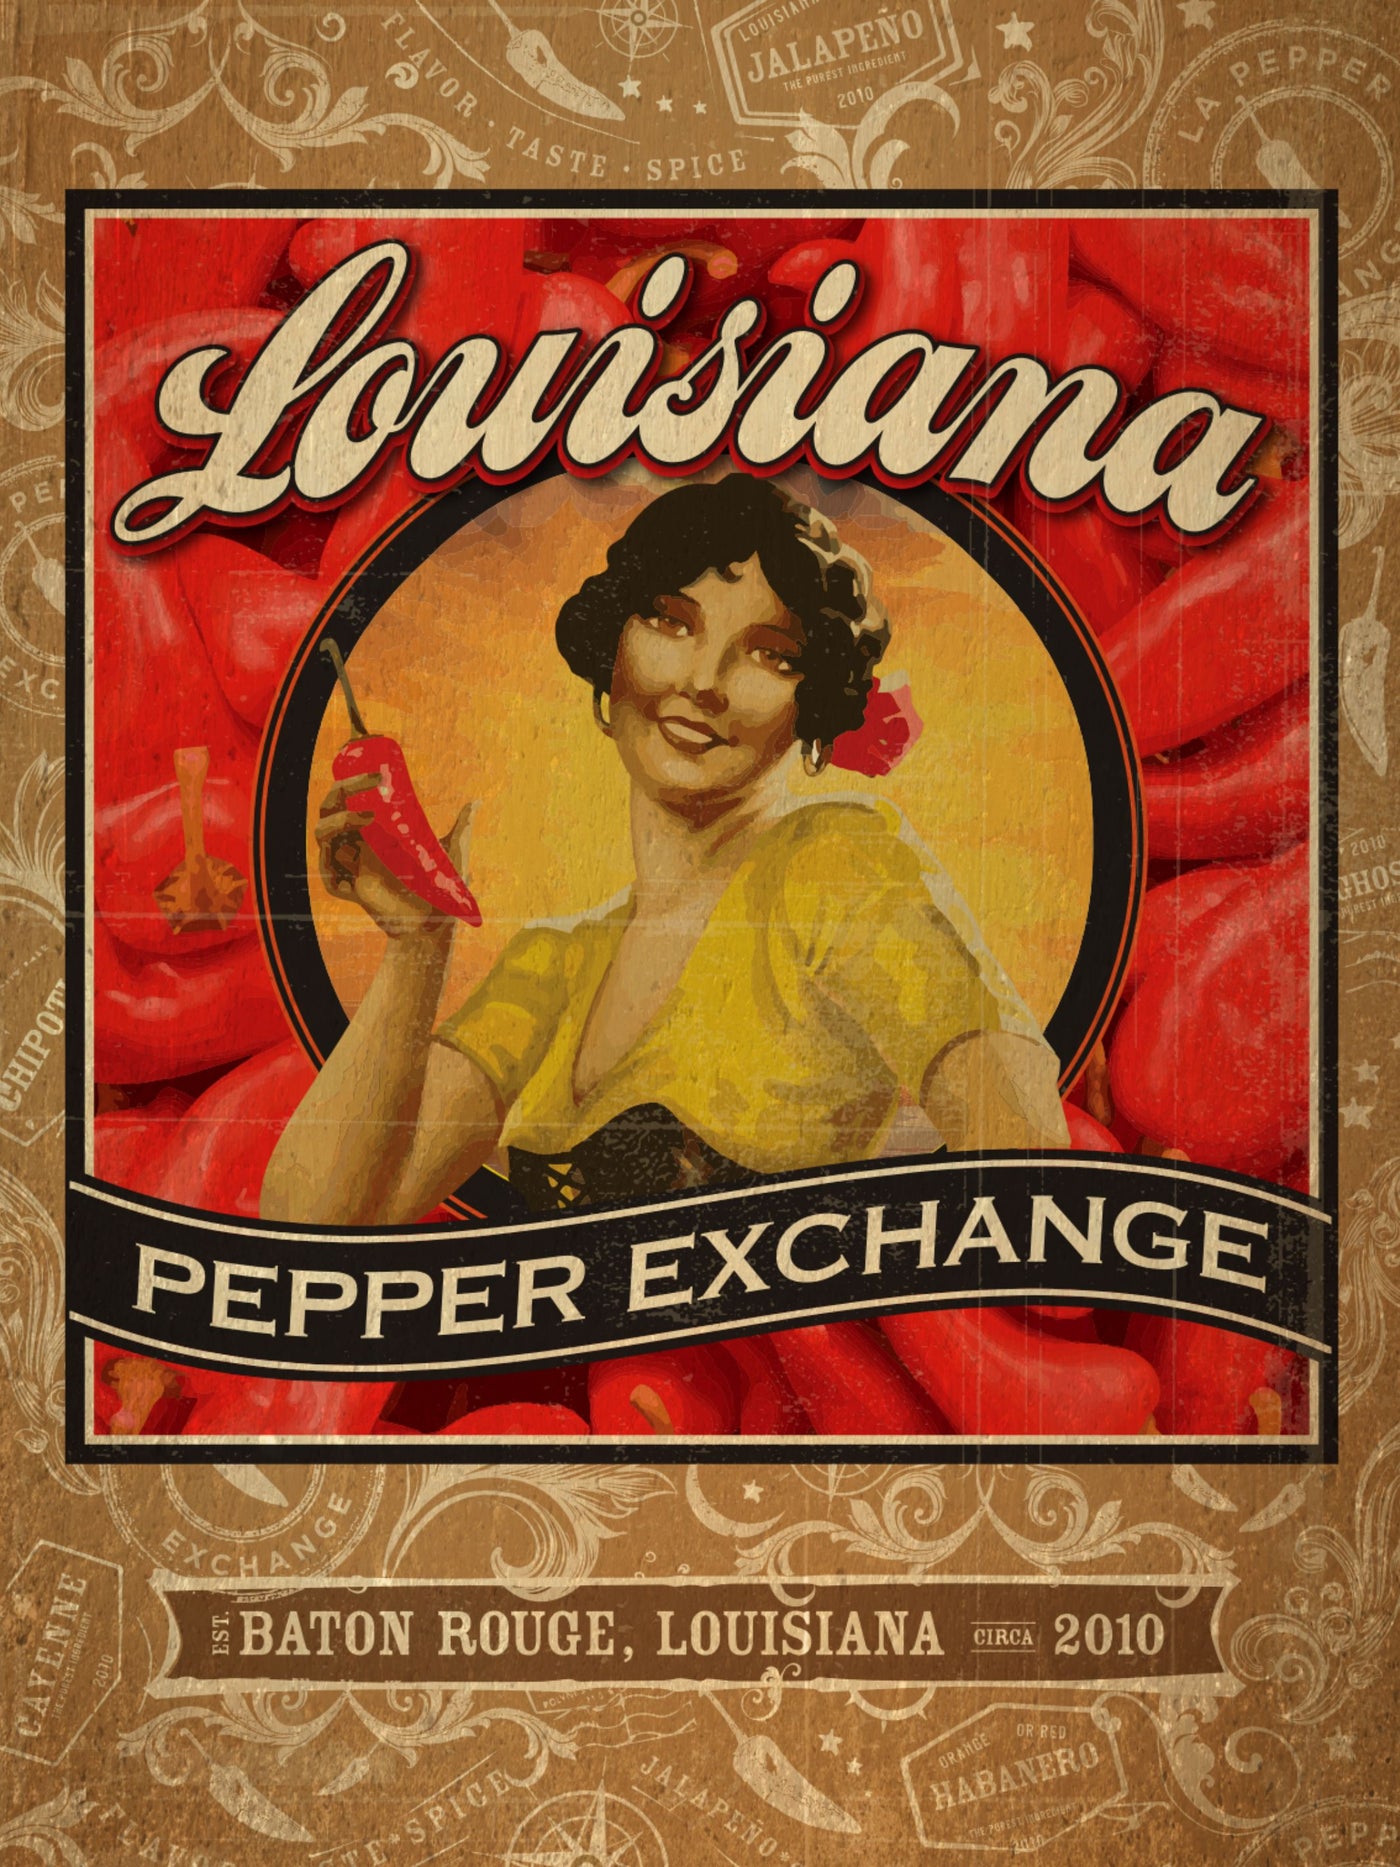 Limited Edition Poster from Louisiana Pepper Exchange